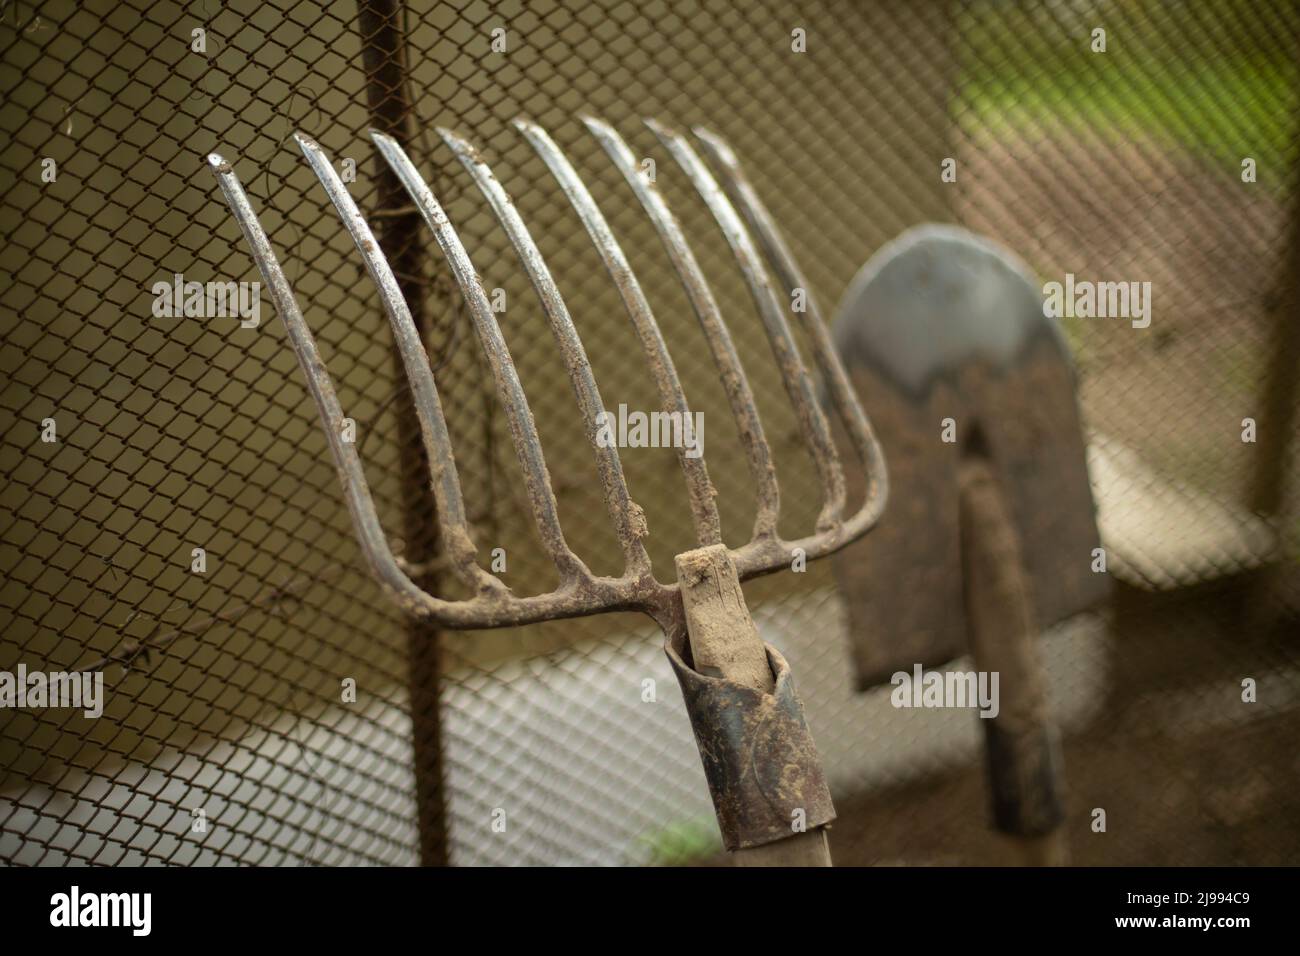 Shovel and rake. Garden tool is leaned against fence. Details of agriculture. Stock Photo